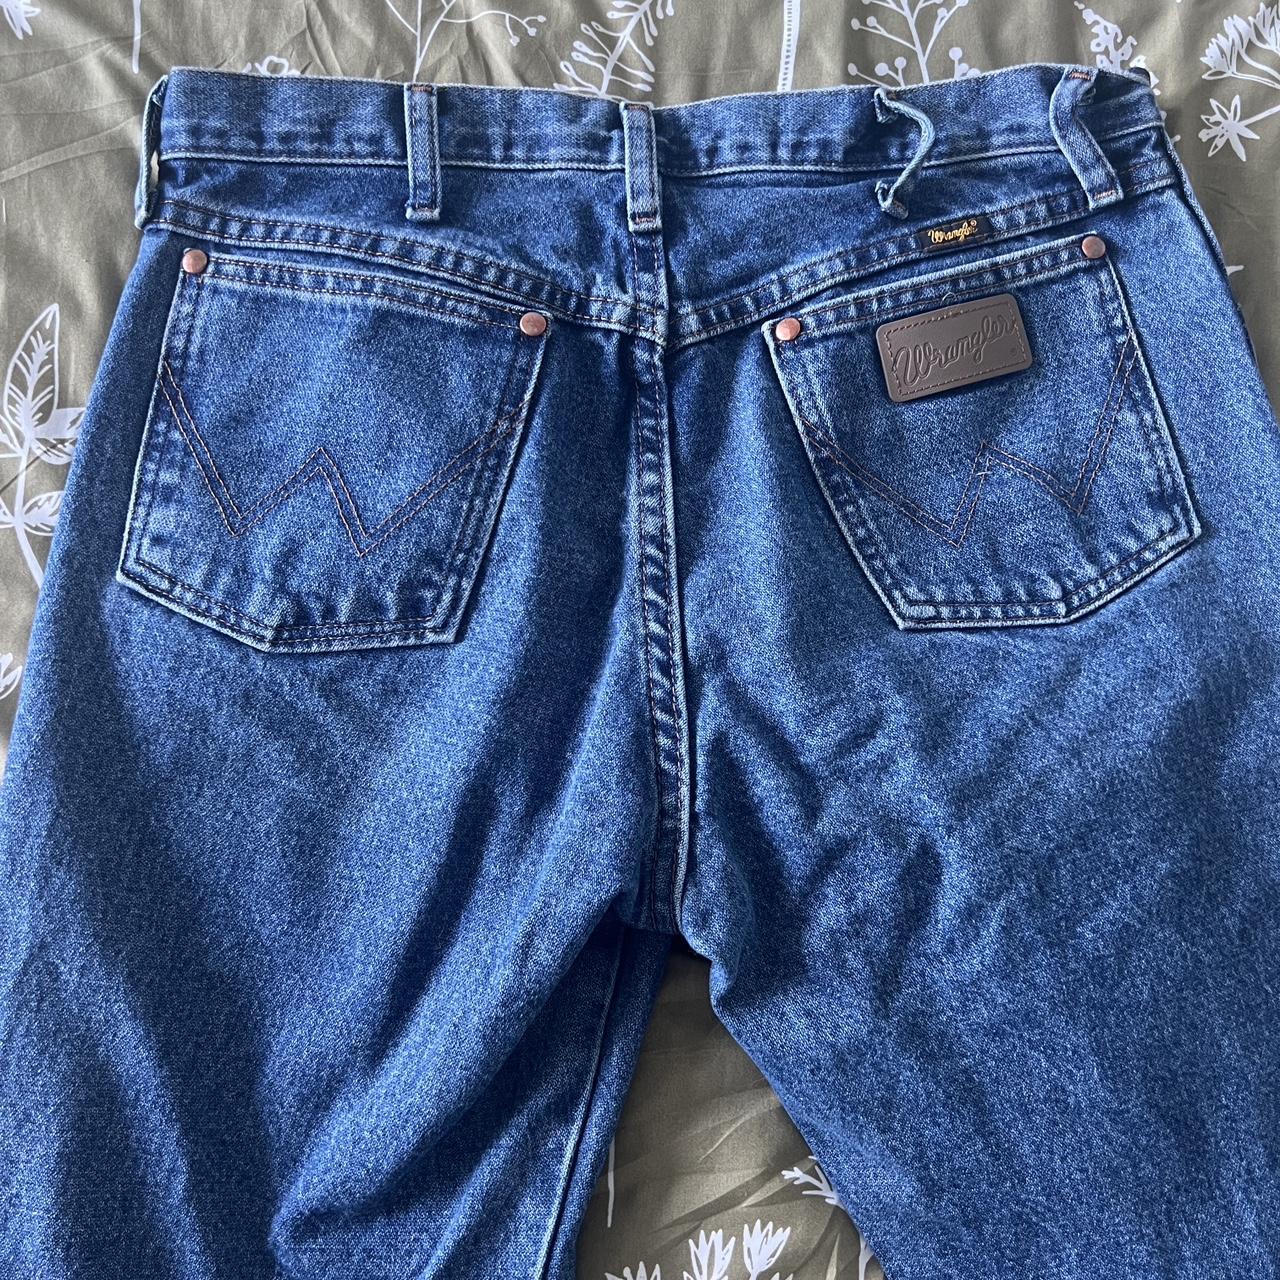 Vintage Wrangler Jeans Love these so much but they... - Depop